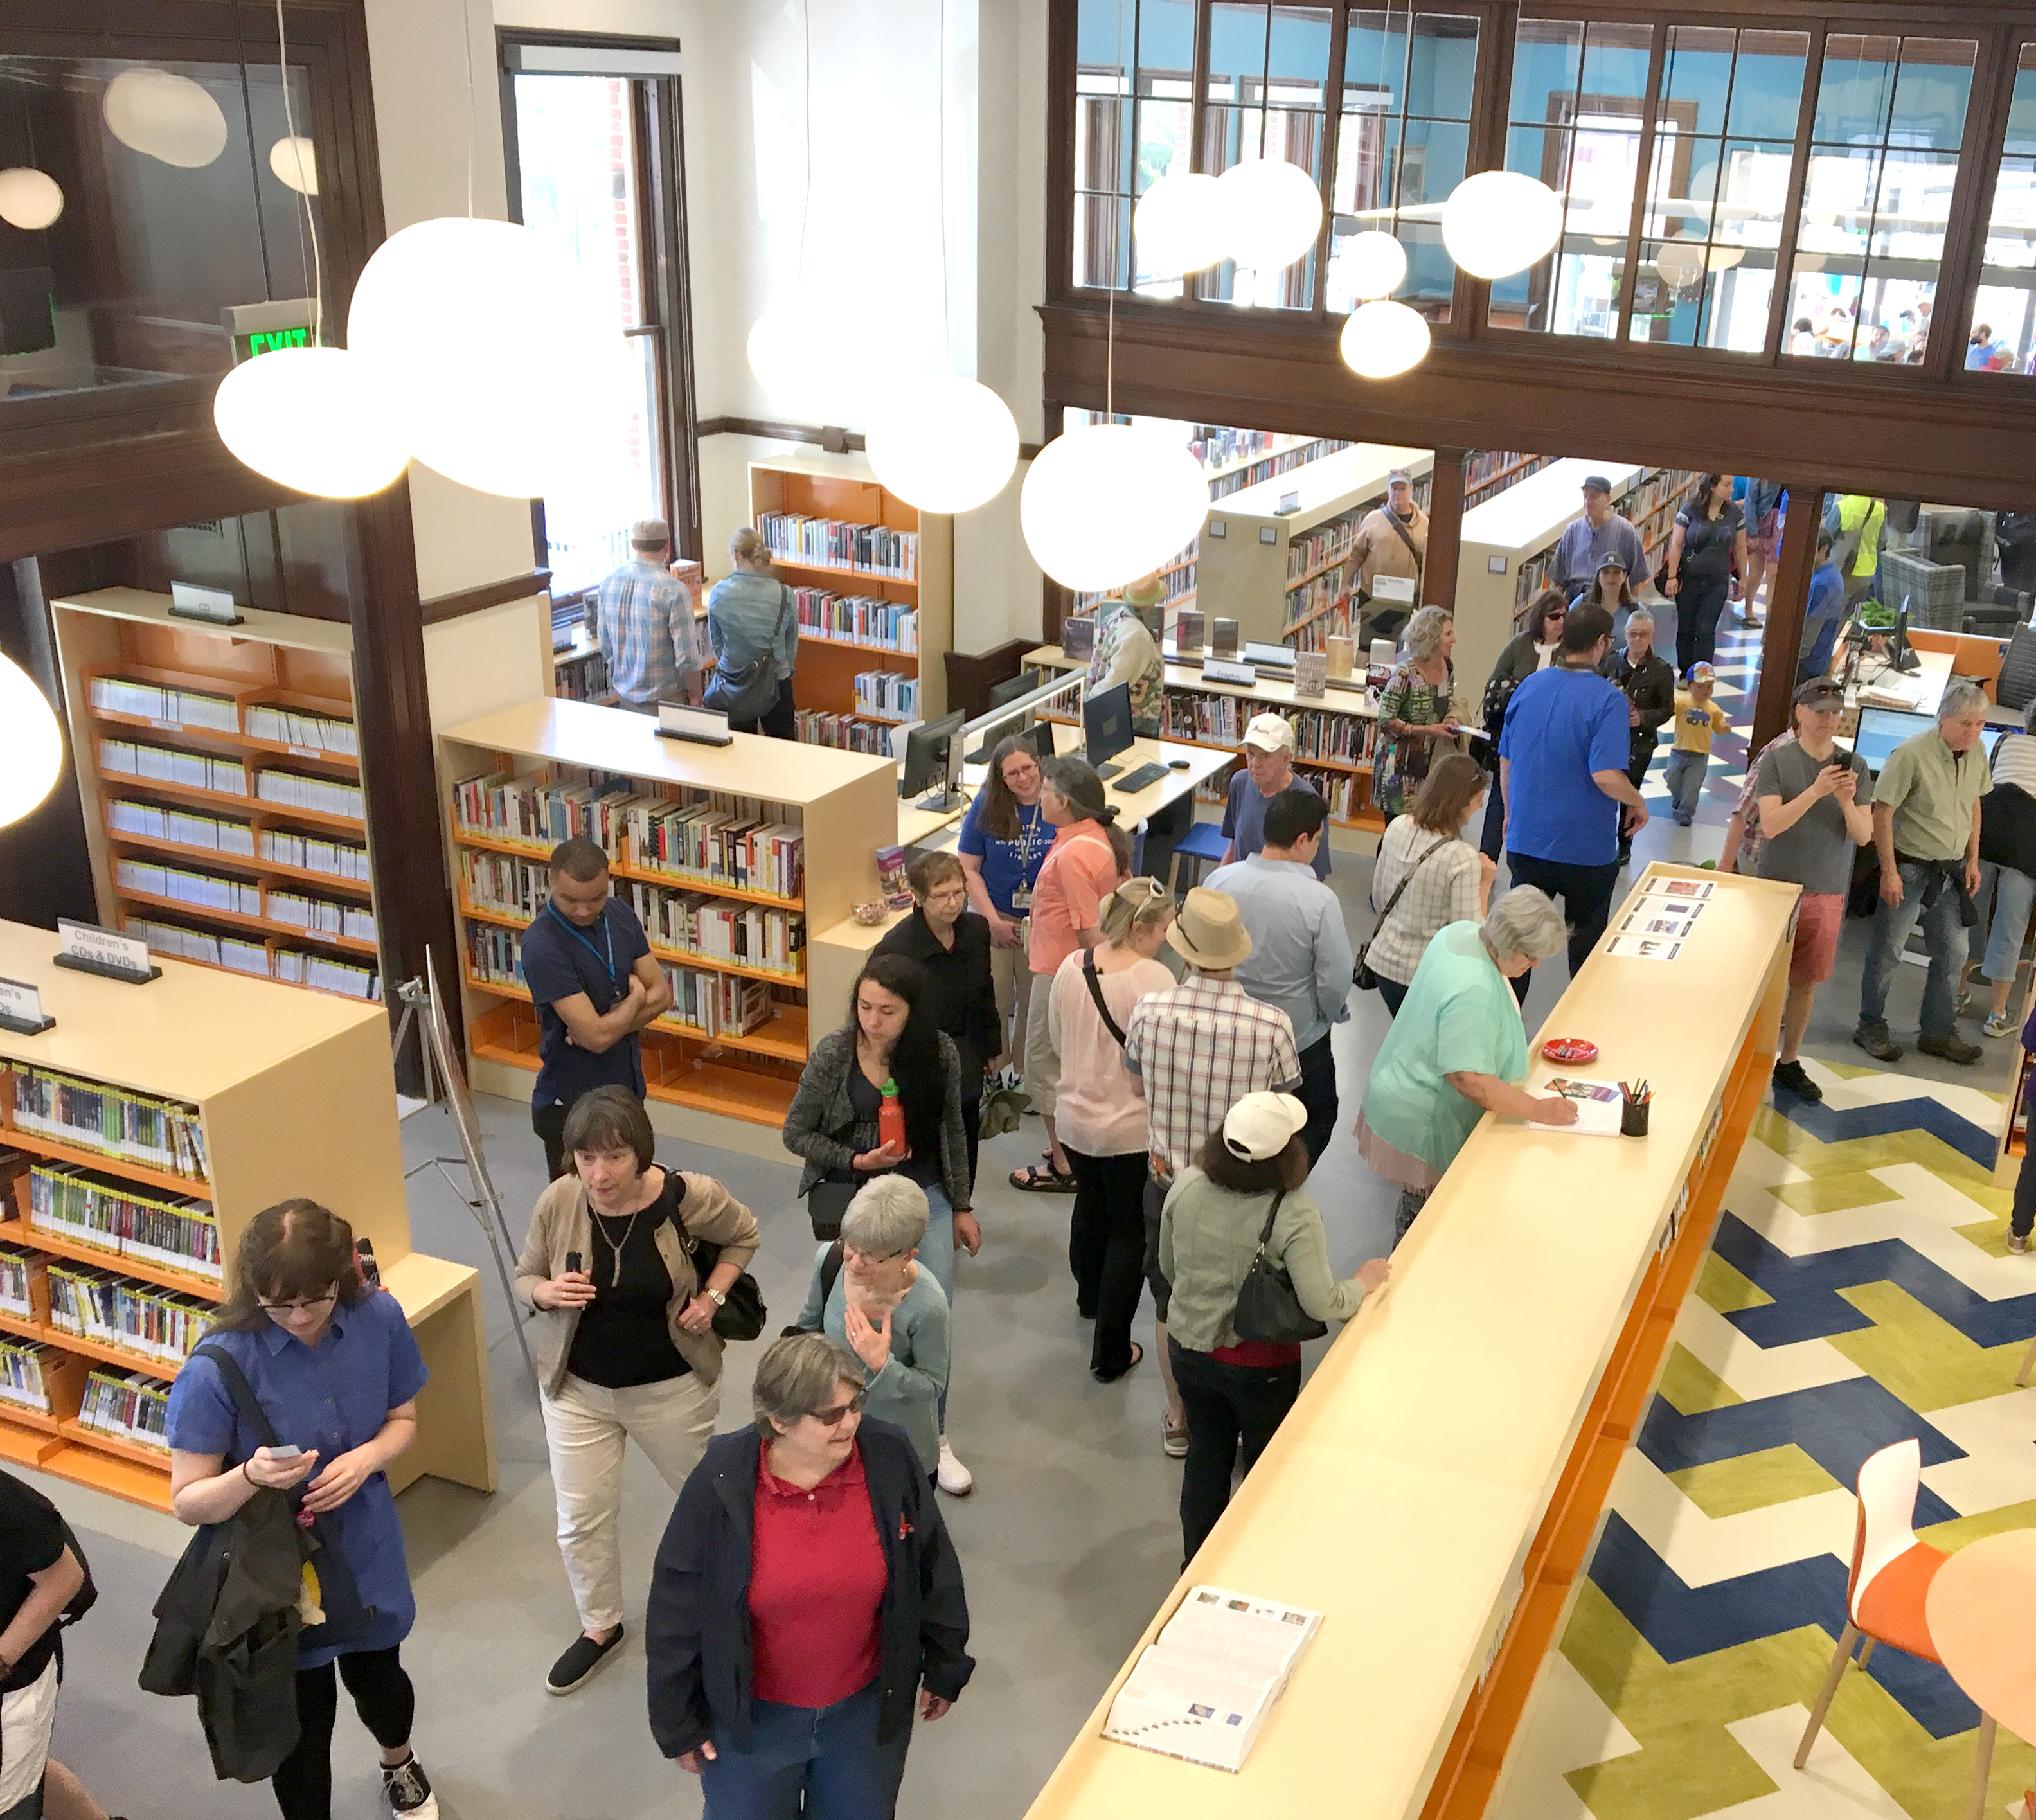 The Jamaica Plain Branch of the Boston Public Library officially reopens!